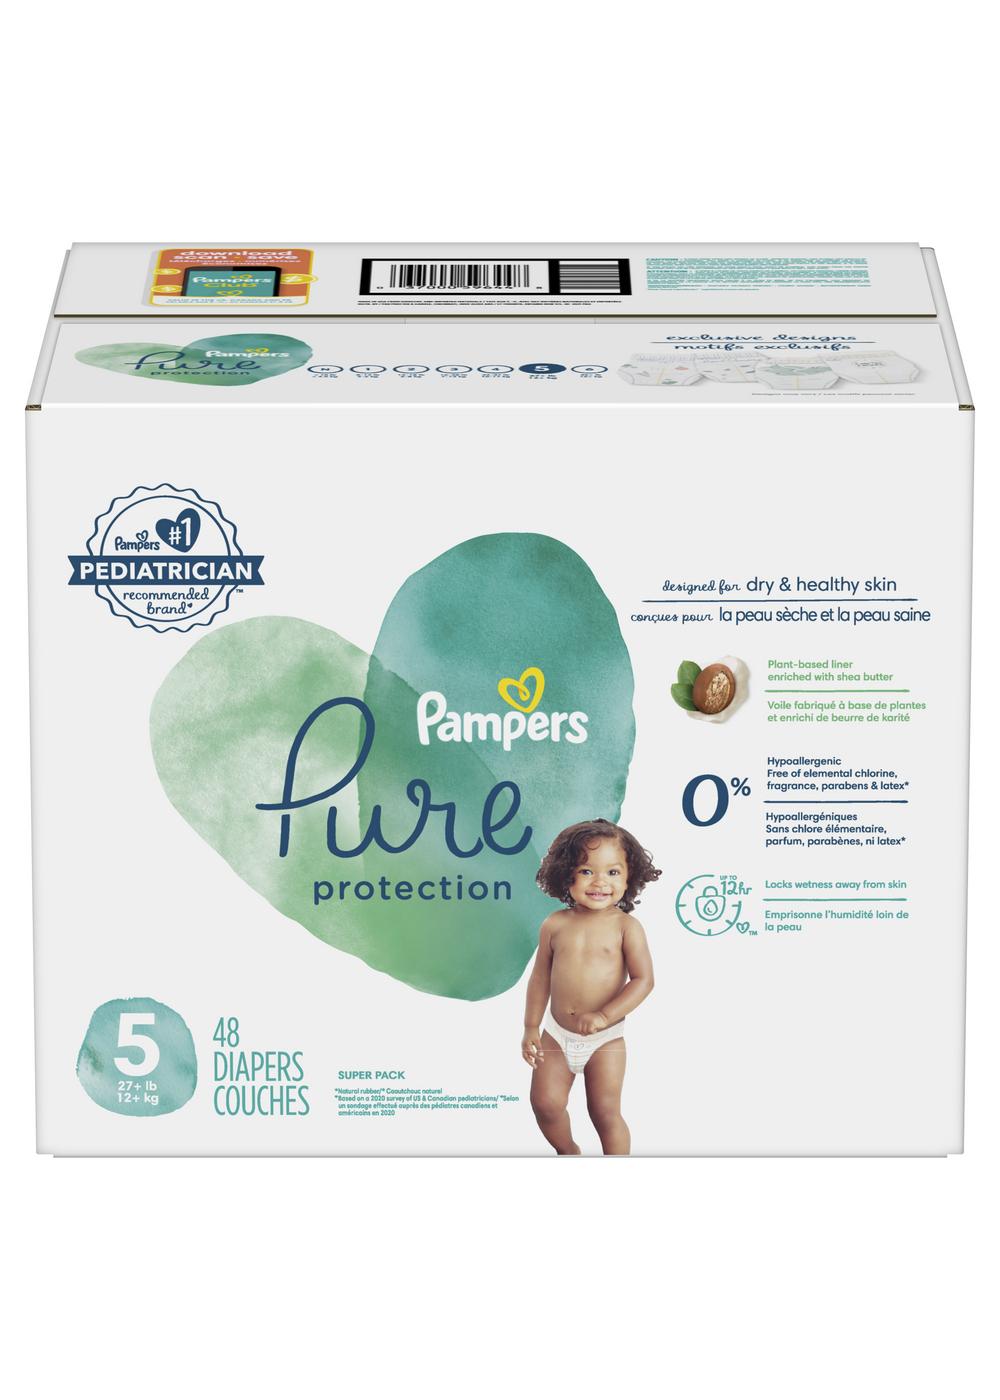 Pampers Pure Protection Diapers - Size 5 - Shop Diapers at H-E-B